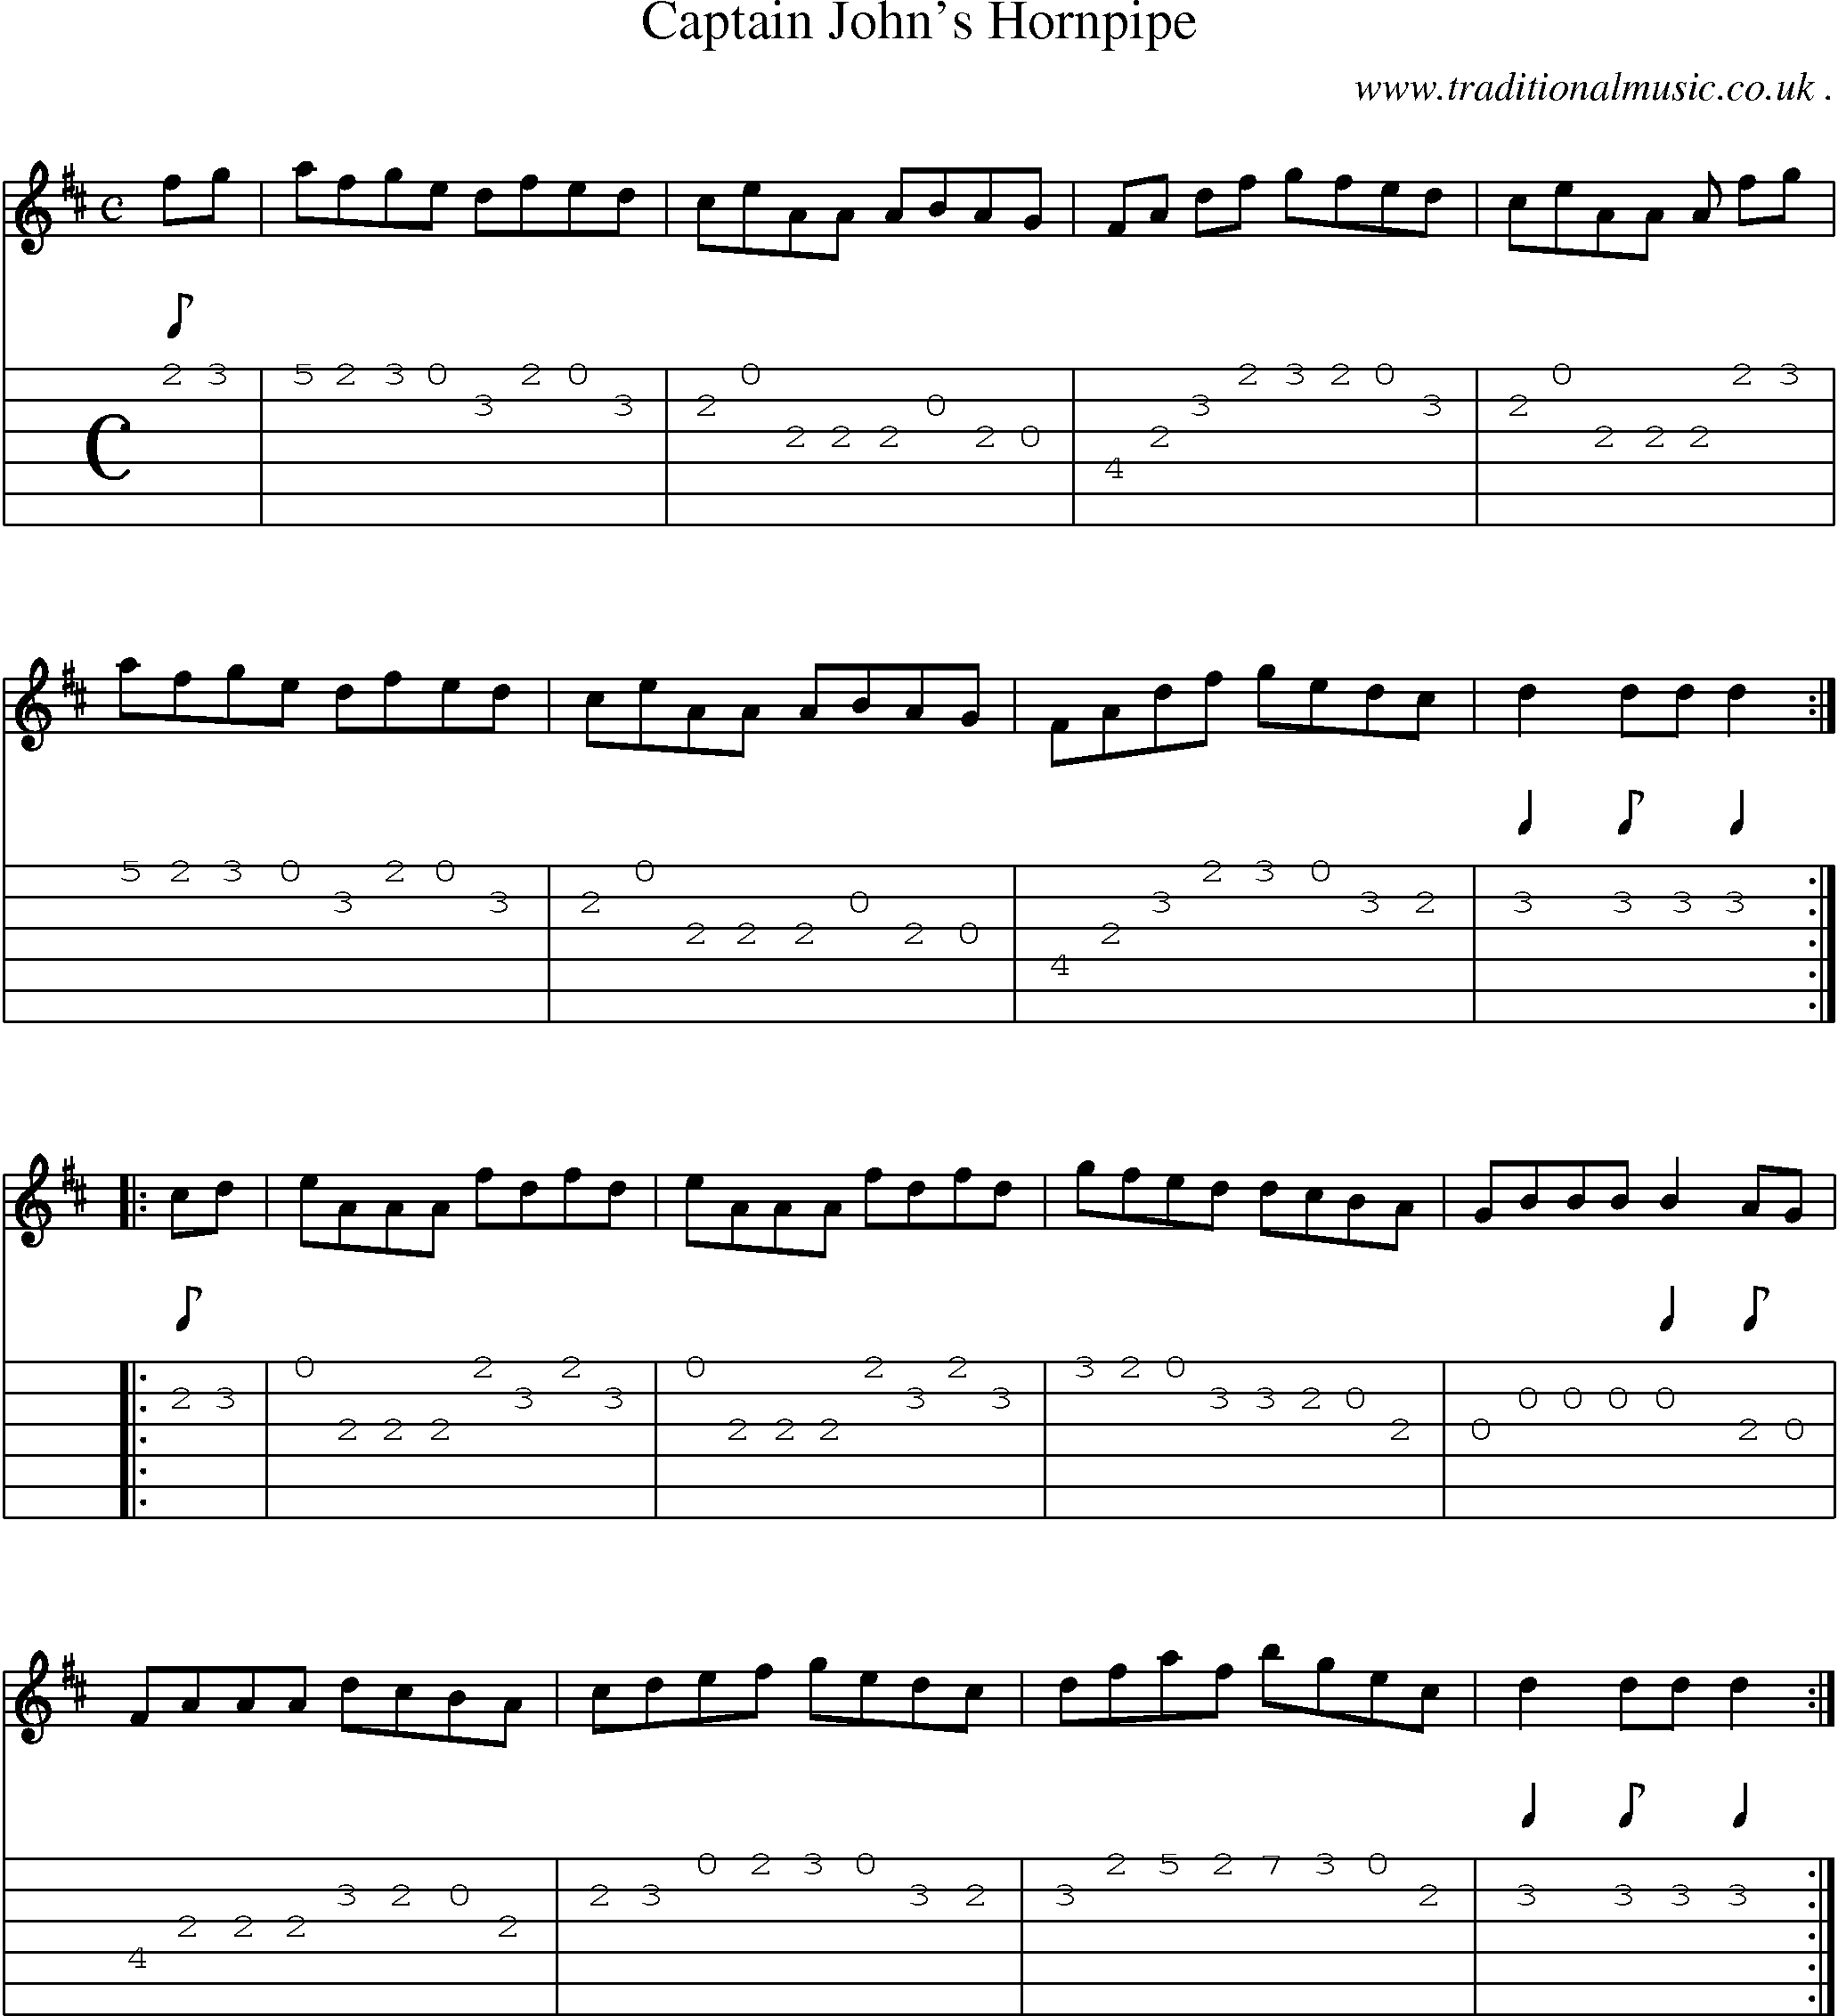 Sheet-Music and Guitar Tabs for Captain Johns Hornpipe